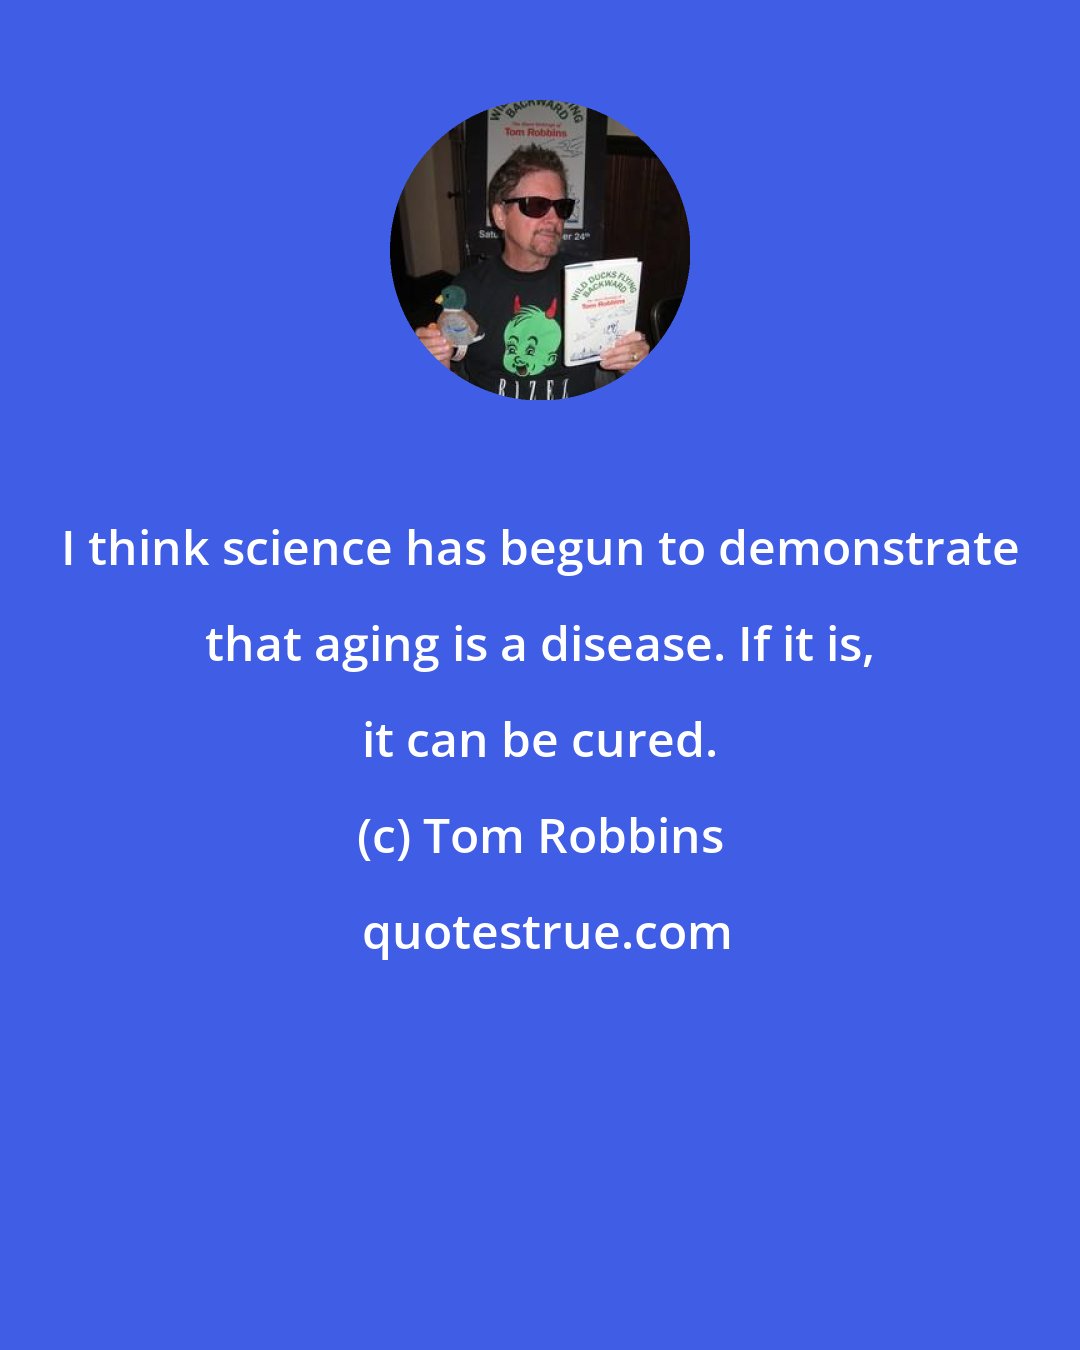 Tom Robbins: I think science has begun to demonstrate that aging is a disease. If it is, it can be cured.